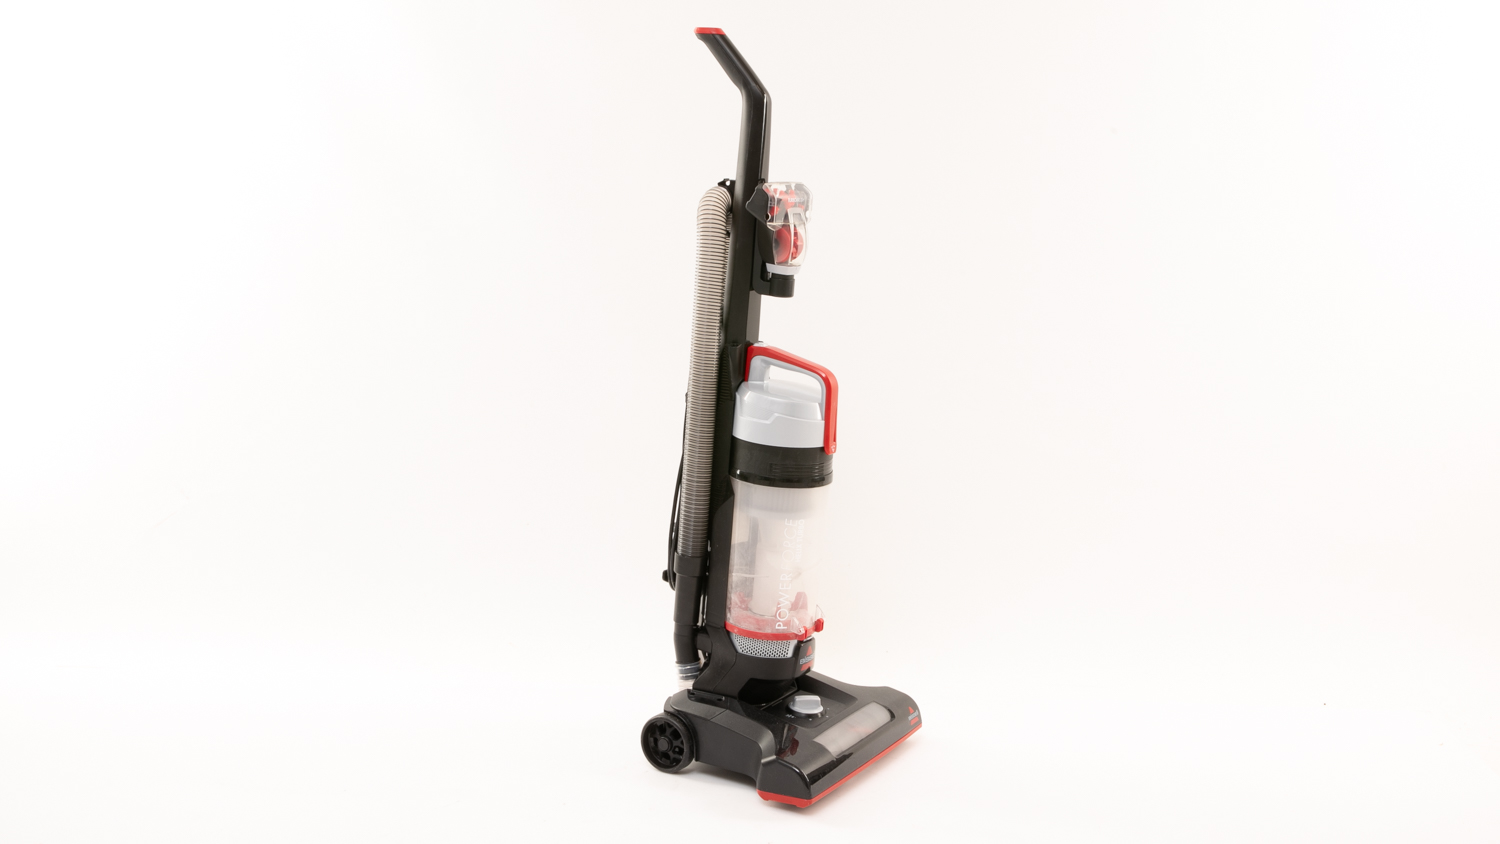 Bissell Powerforce Helix Vacuum 2110F carousel image